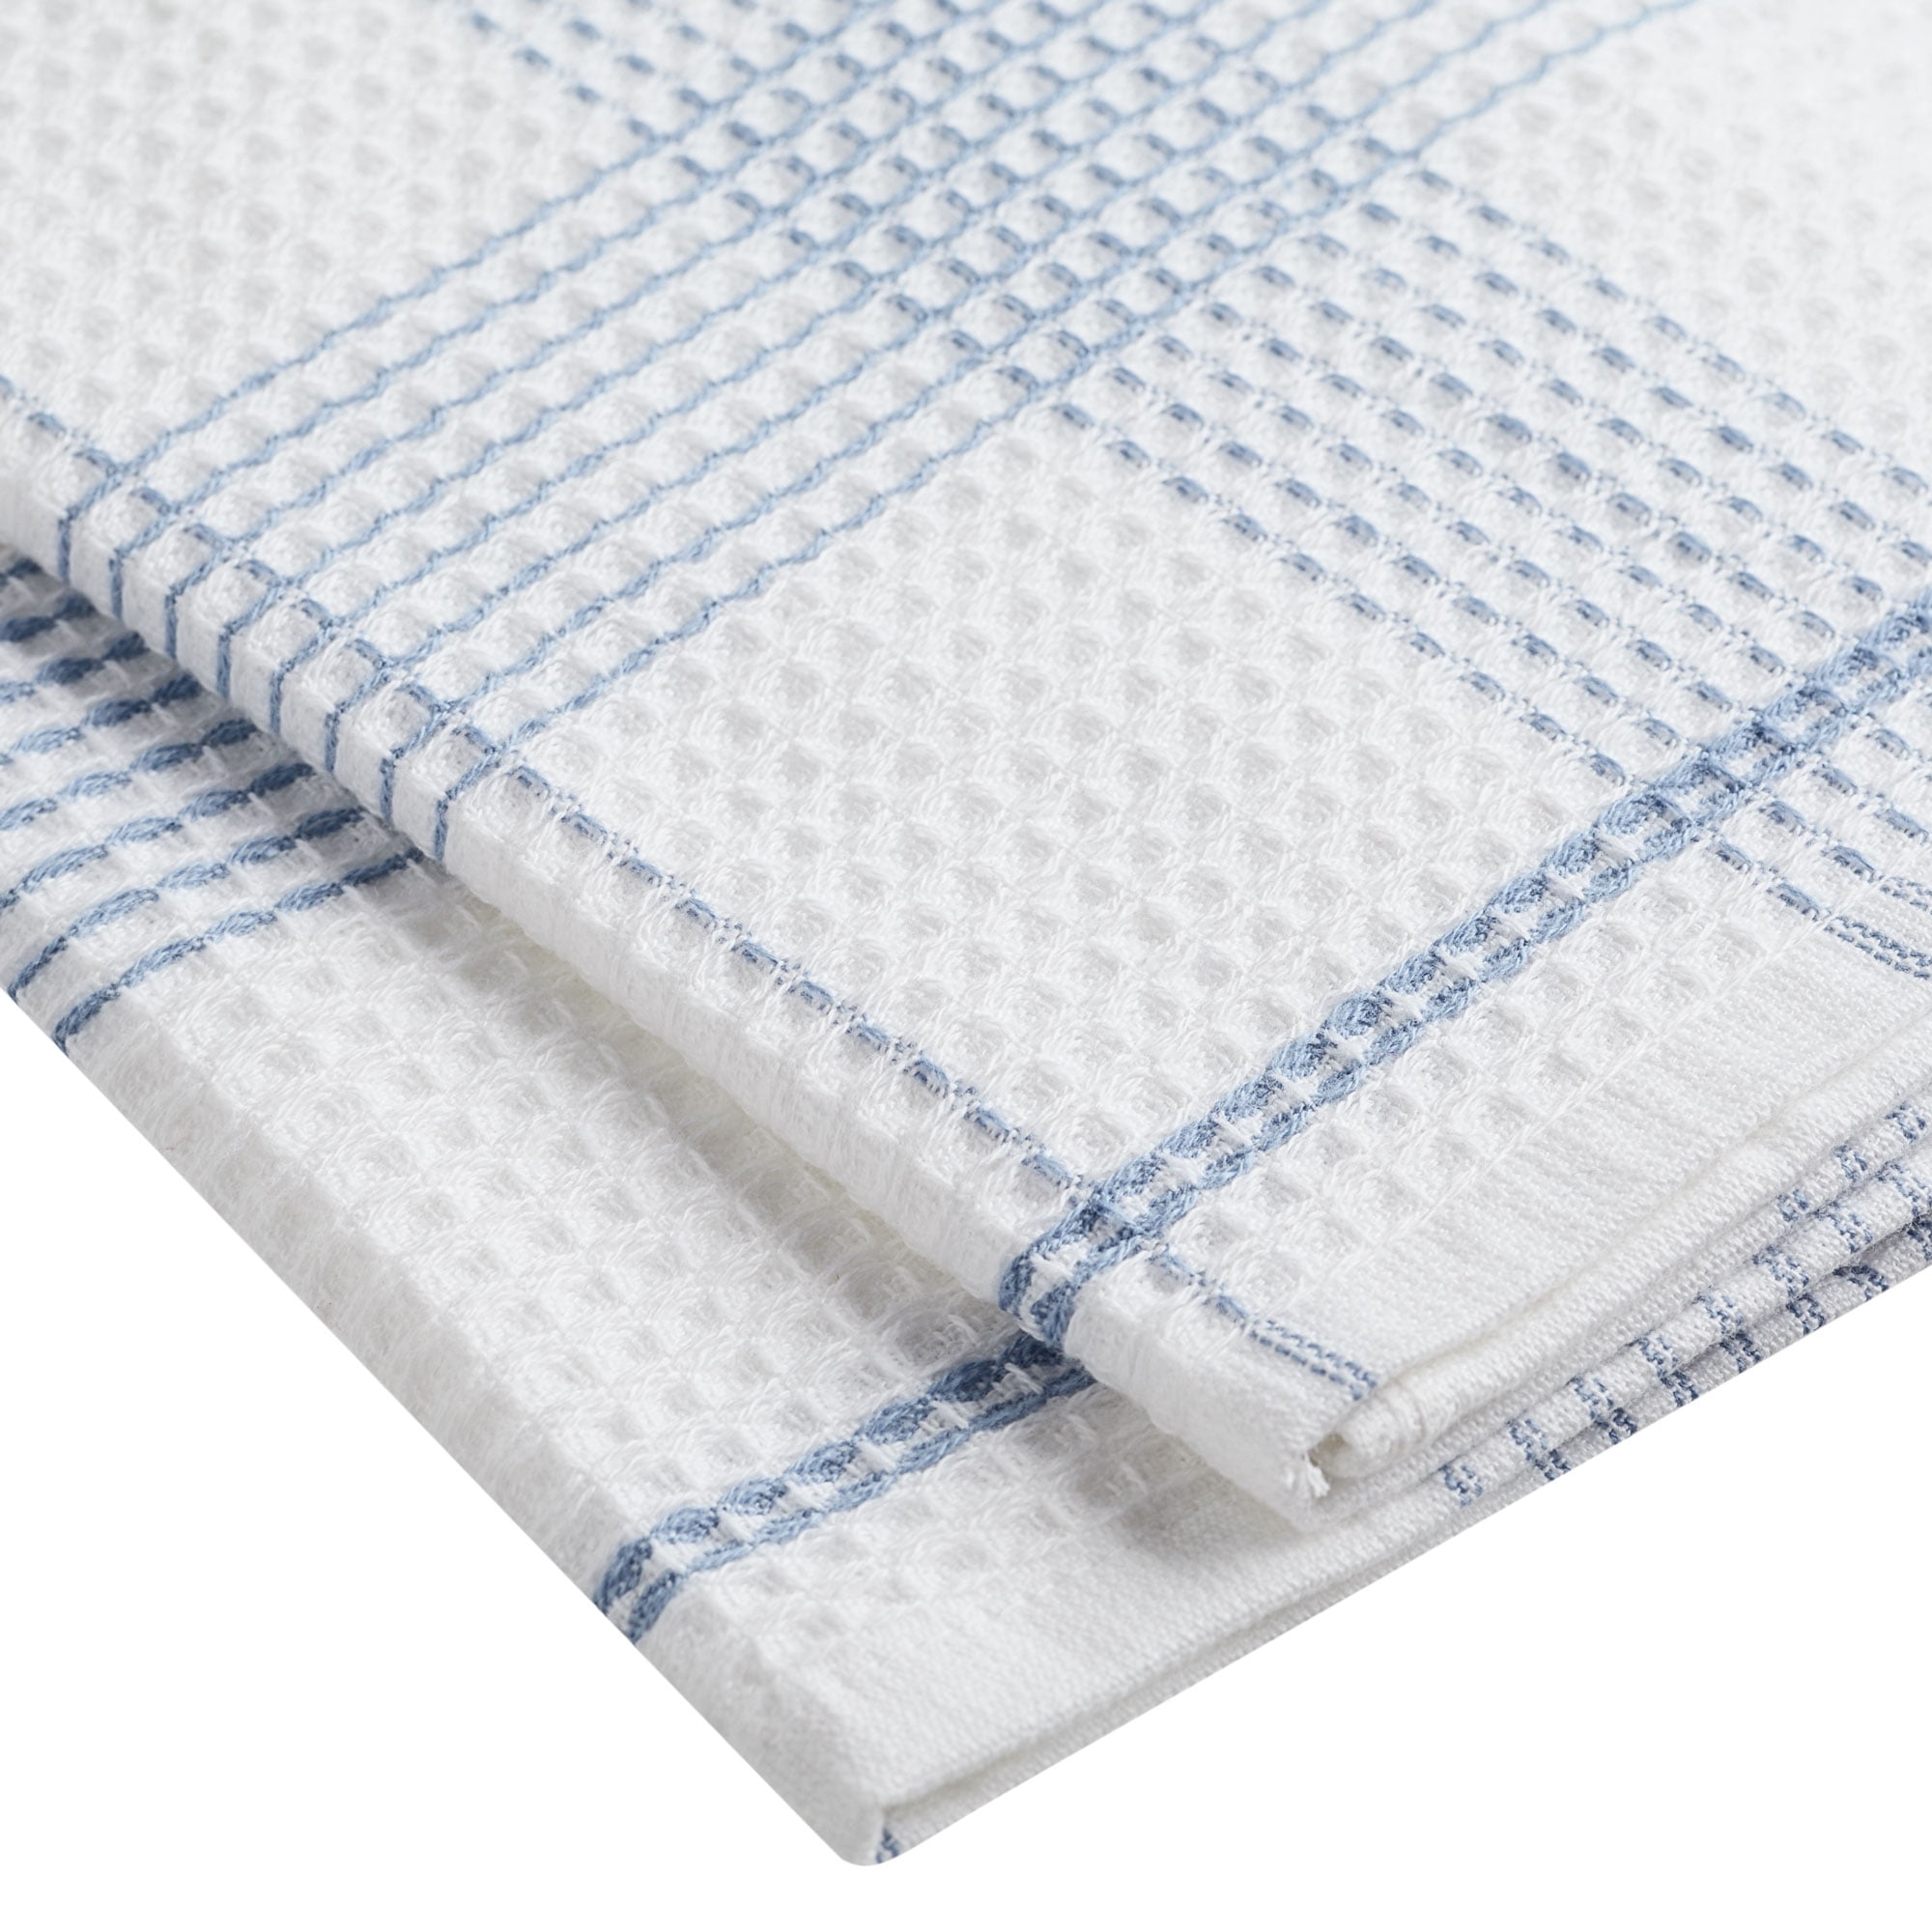  PY HOME & SPORTS Kitchen Towels Set of 4, 100% Cotton 14x14  Waffle Weave Dish Towels, Super Absorbent Kitchen Hand Dish Cloths for  Drying and Cleaning : Home & Kitchen